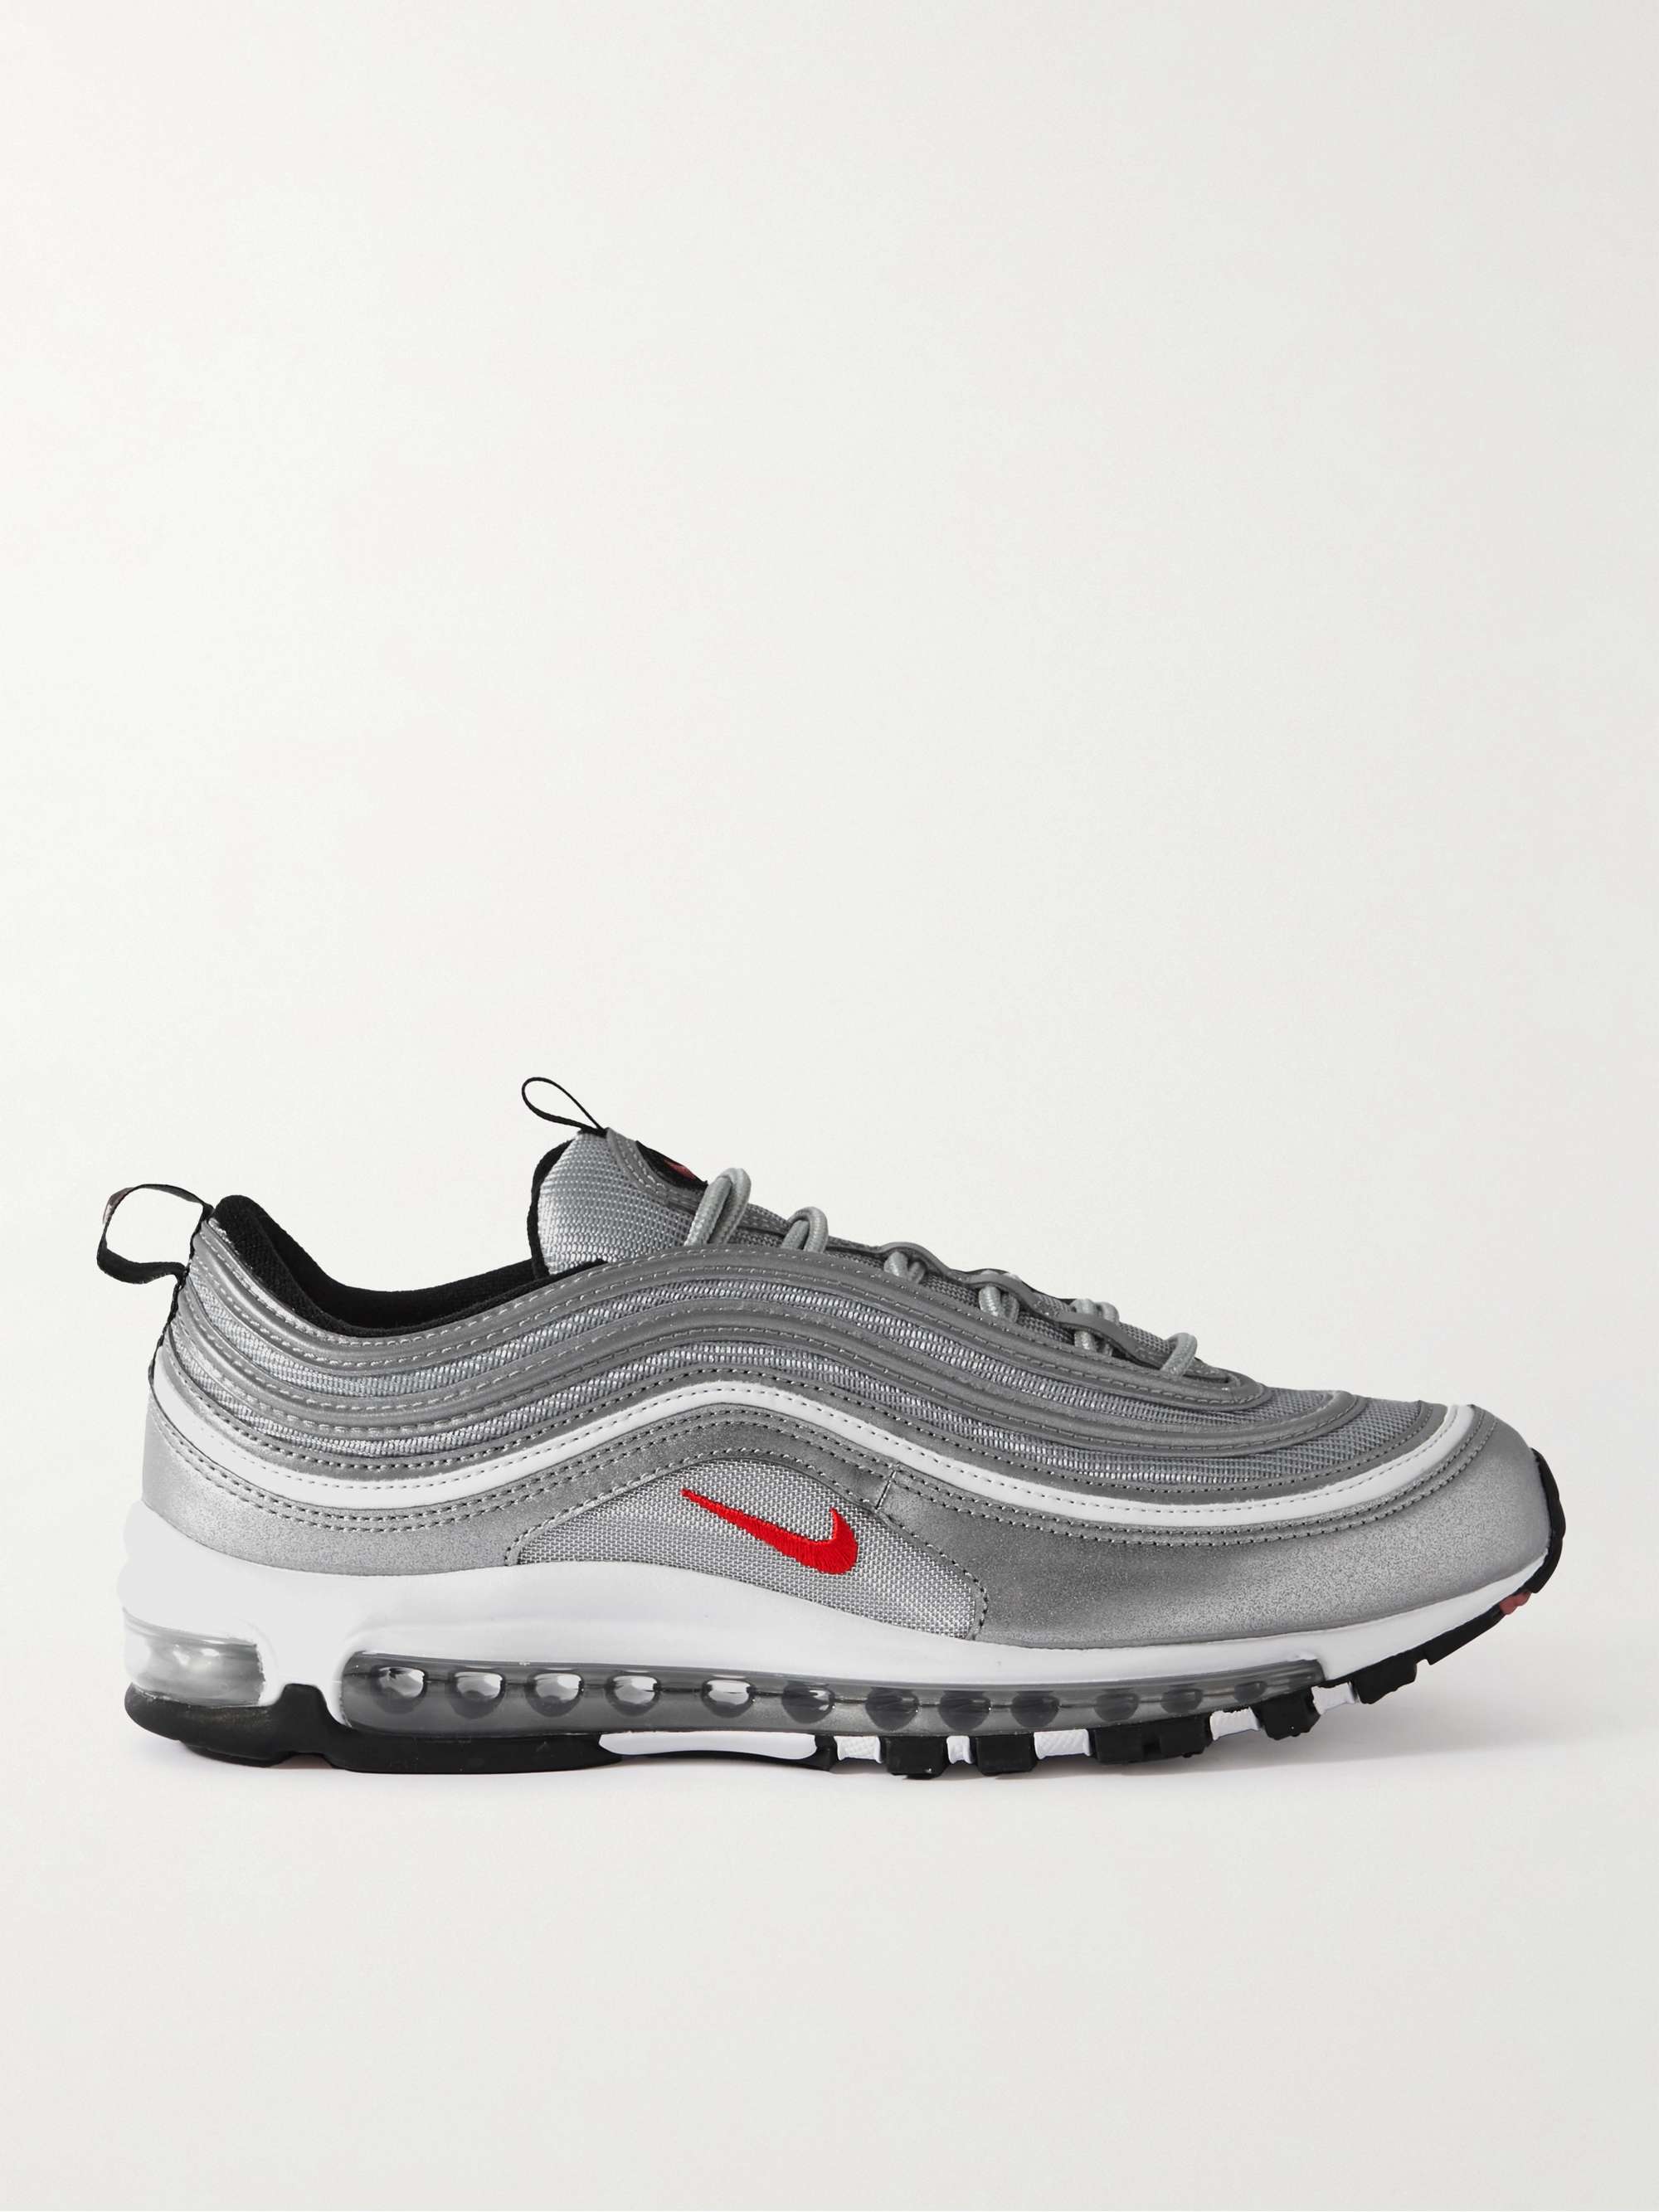 NIKE Max 97 Metallic Leather and Mesh Sneakers for Men MR PORTER